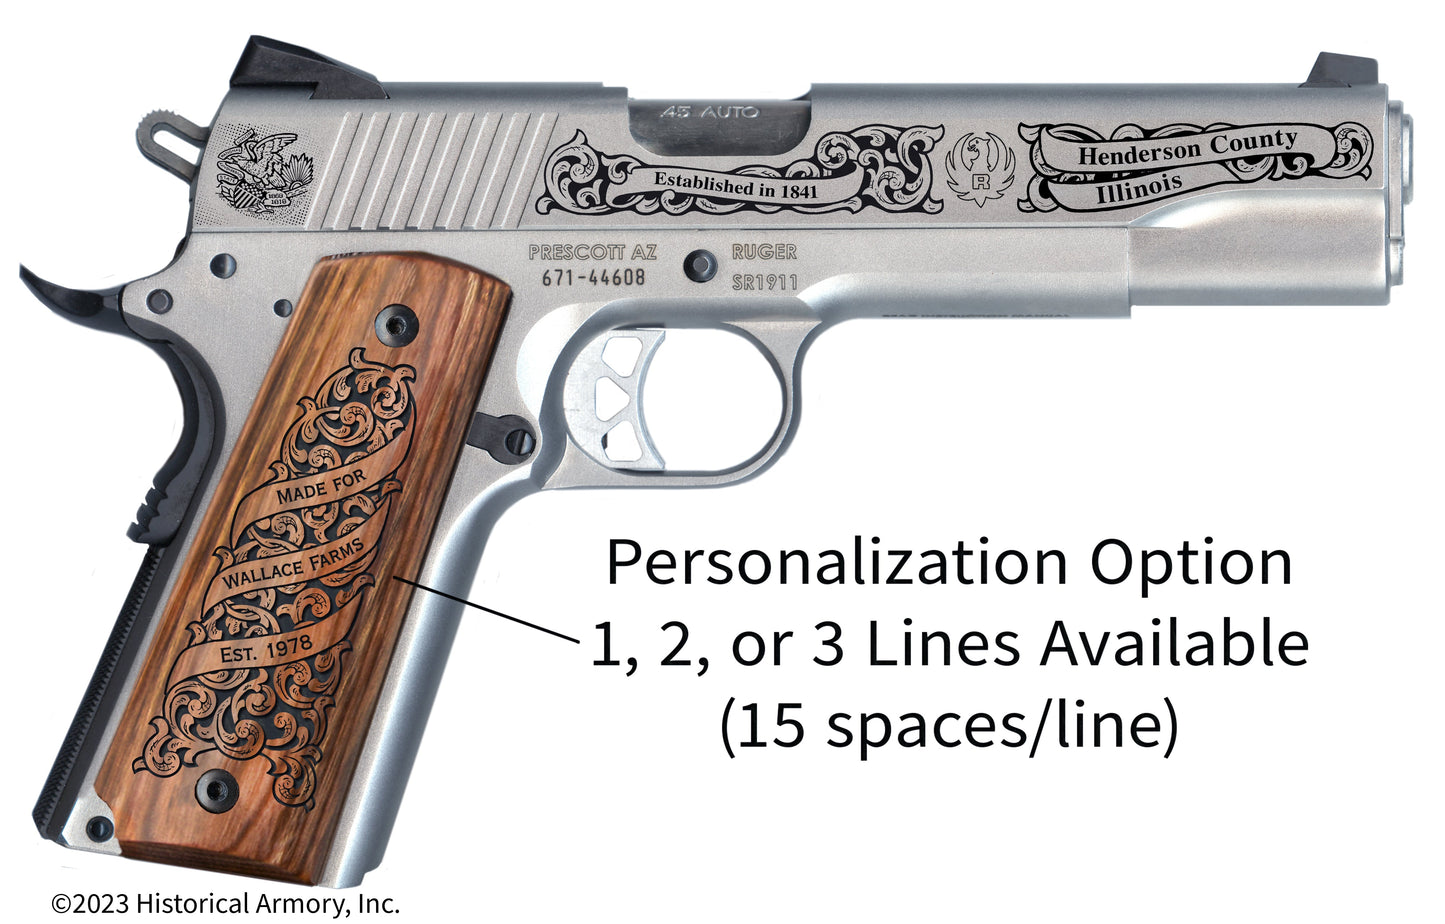 Henderson County Illinois Personalized Engraved .45 Auto Ruger 1911